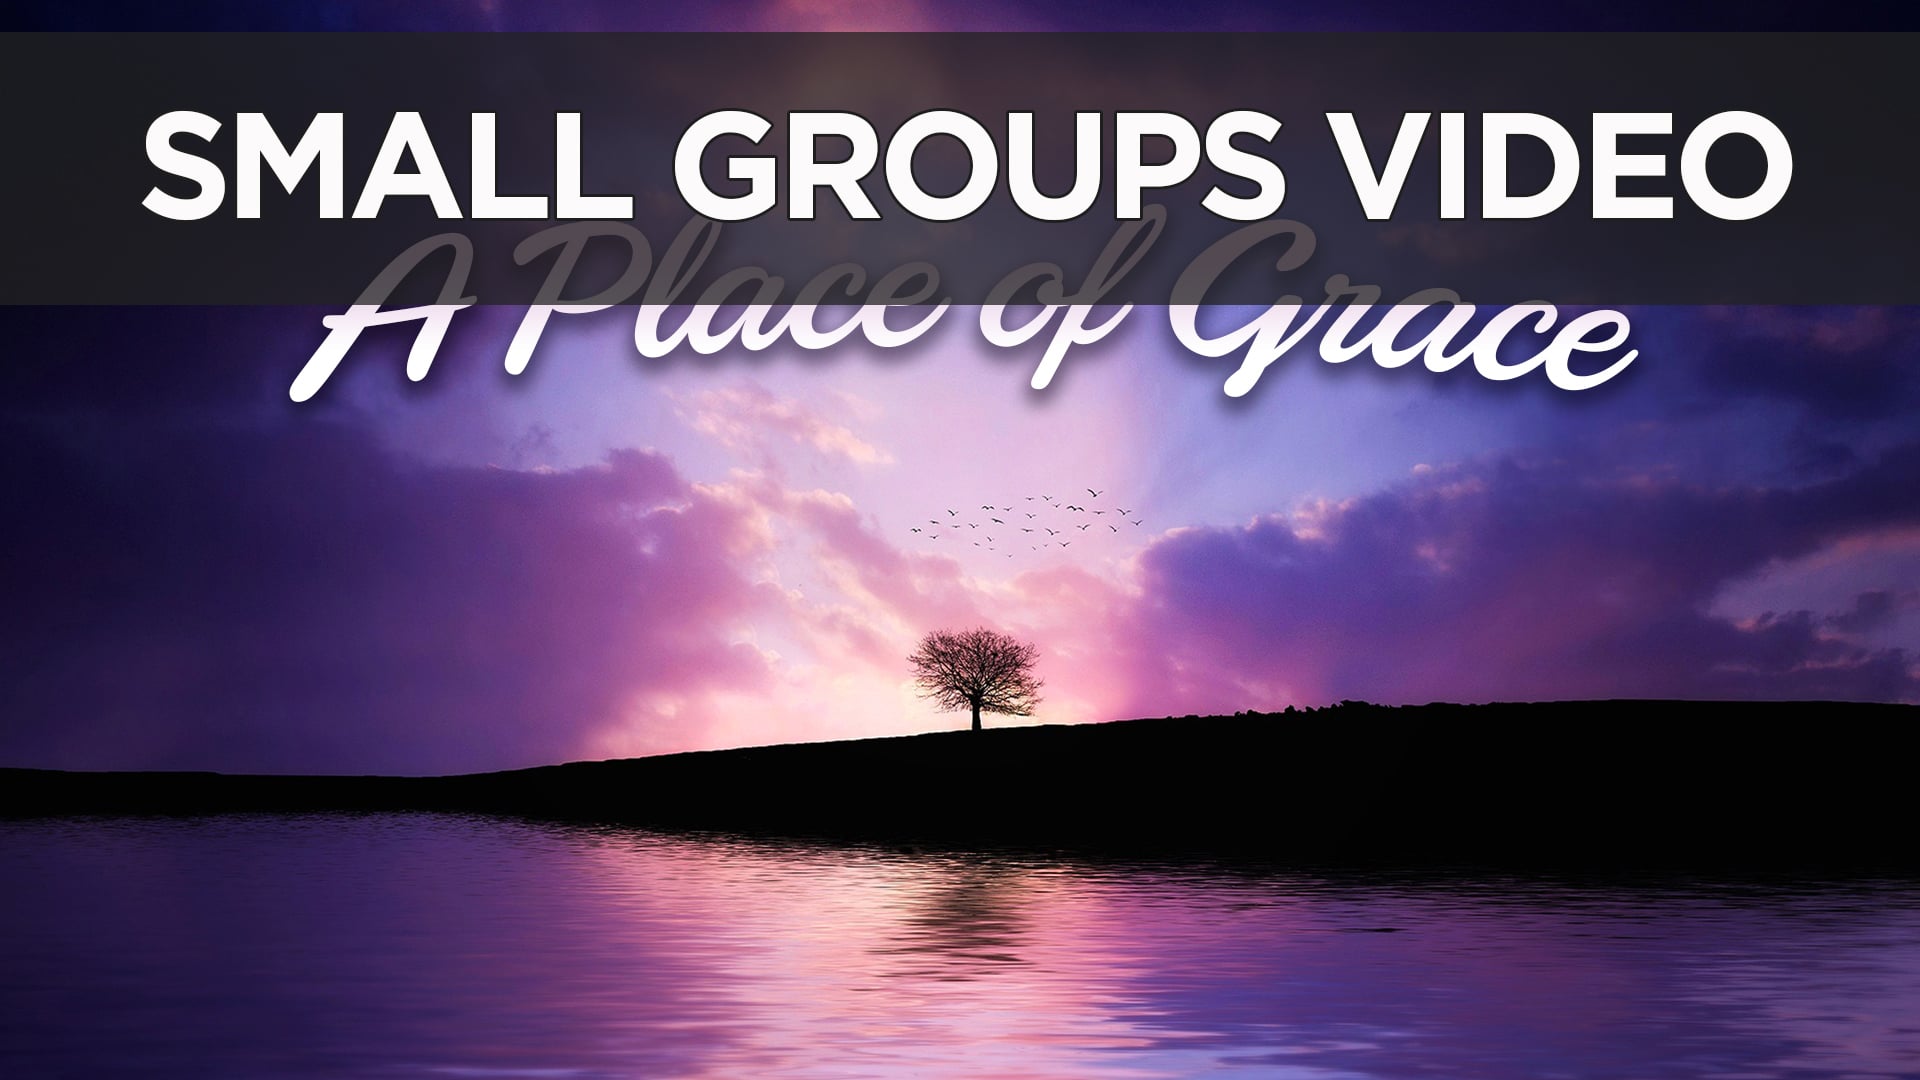 Small Groups Video -  A Place of Grace